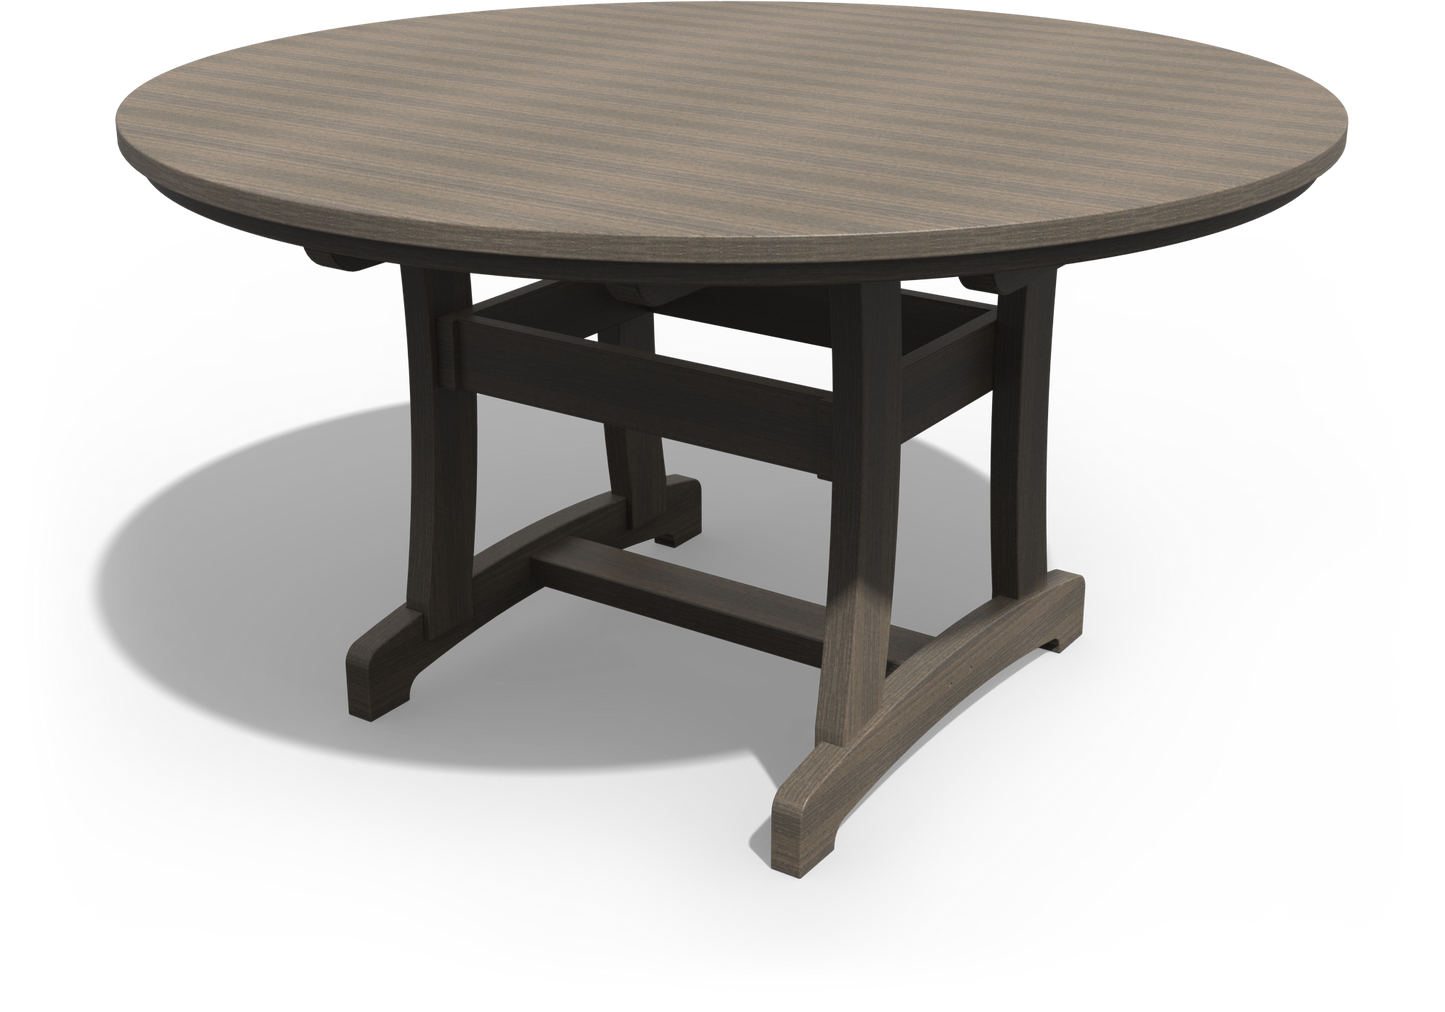 Patiova Recycled Plastic 54" Round Legacy Dining Table - LEAD TIME TO SHIP 4 WEEKS